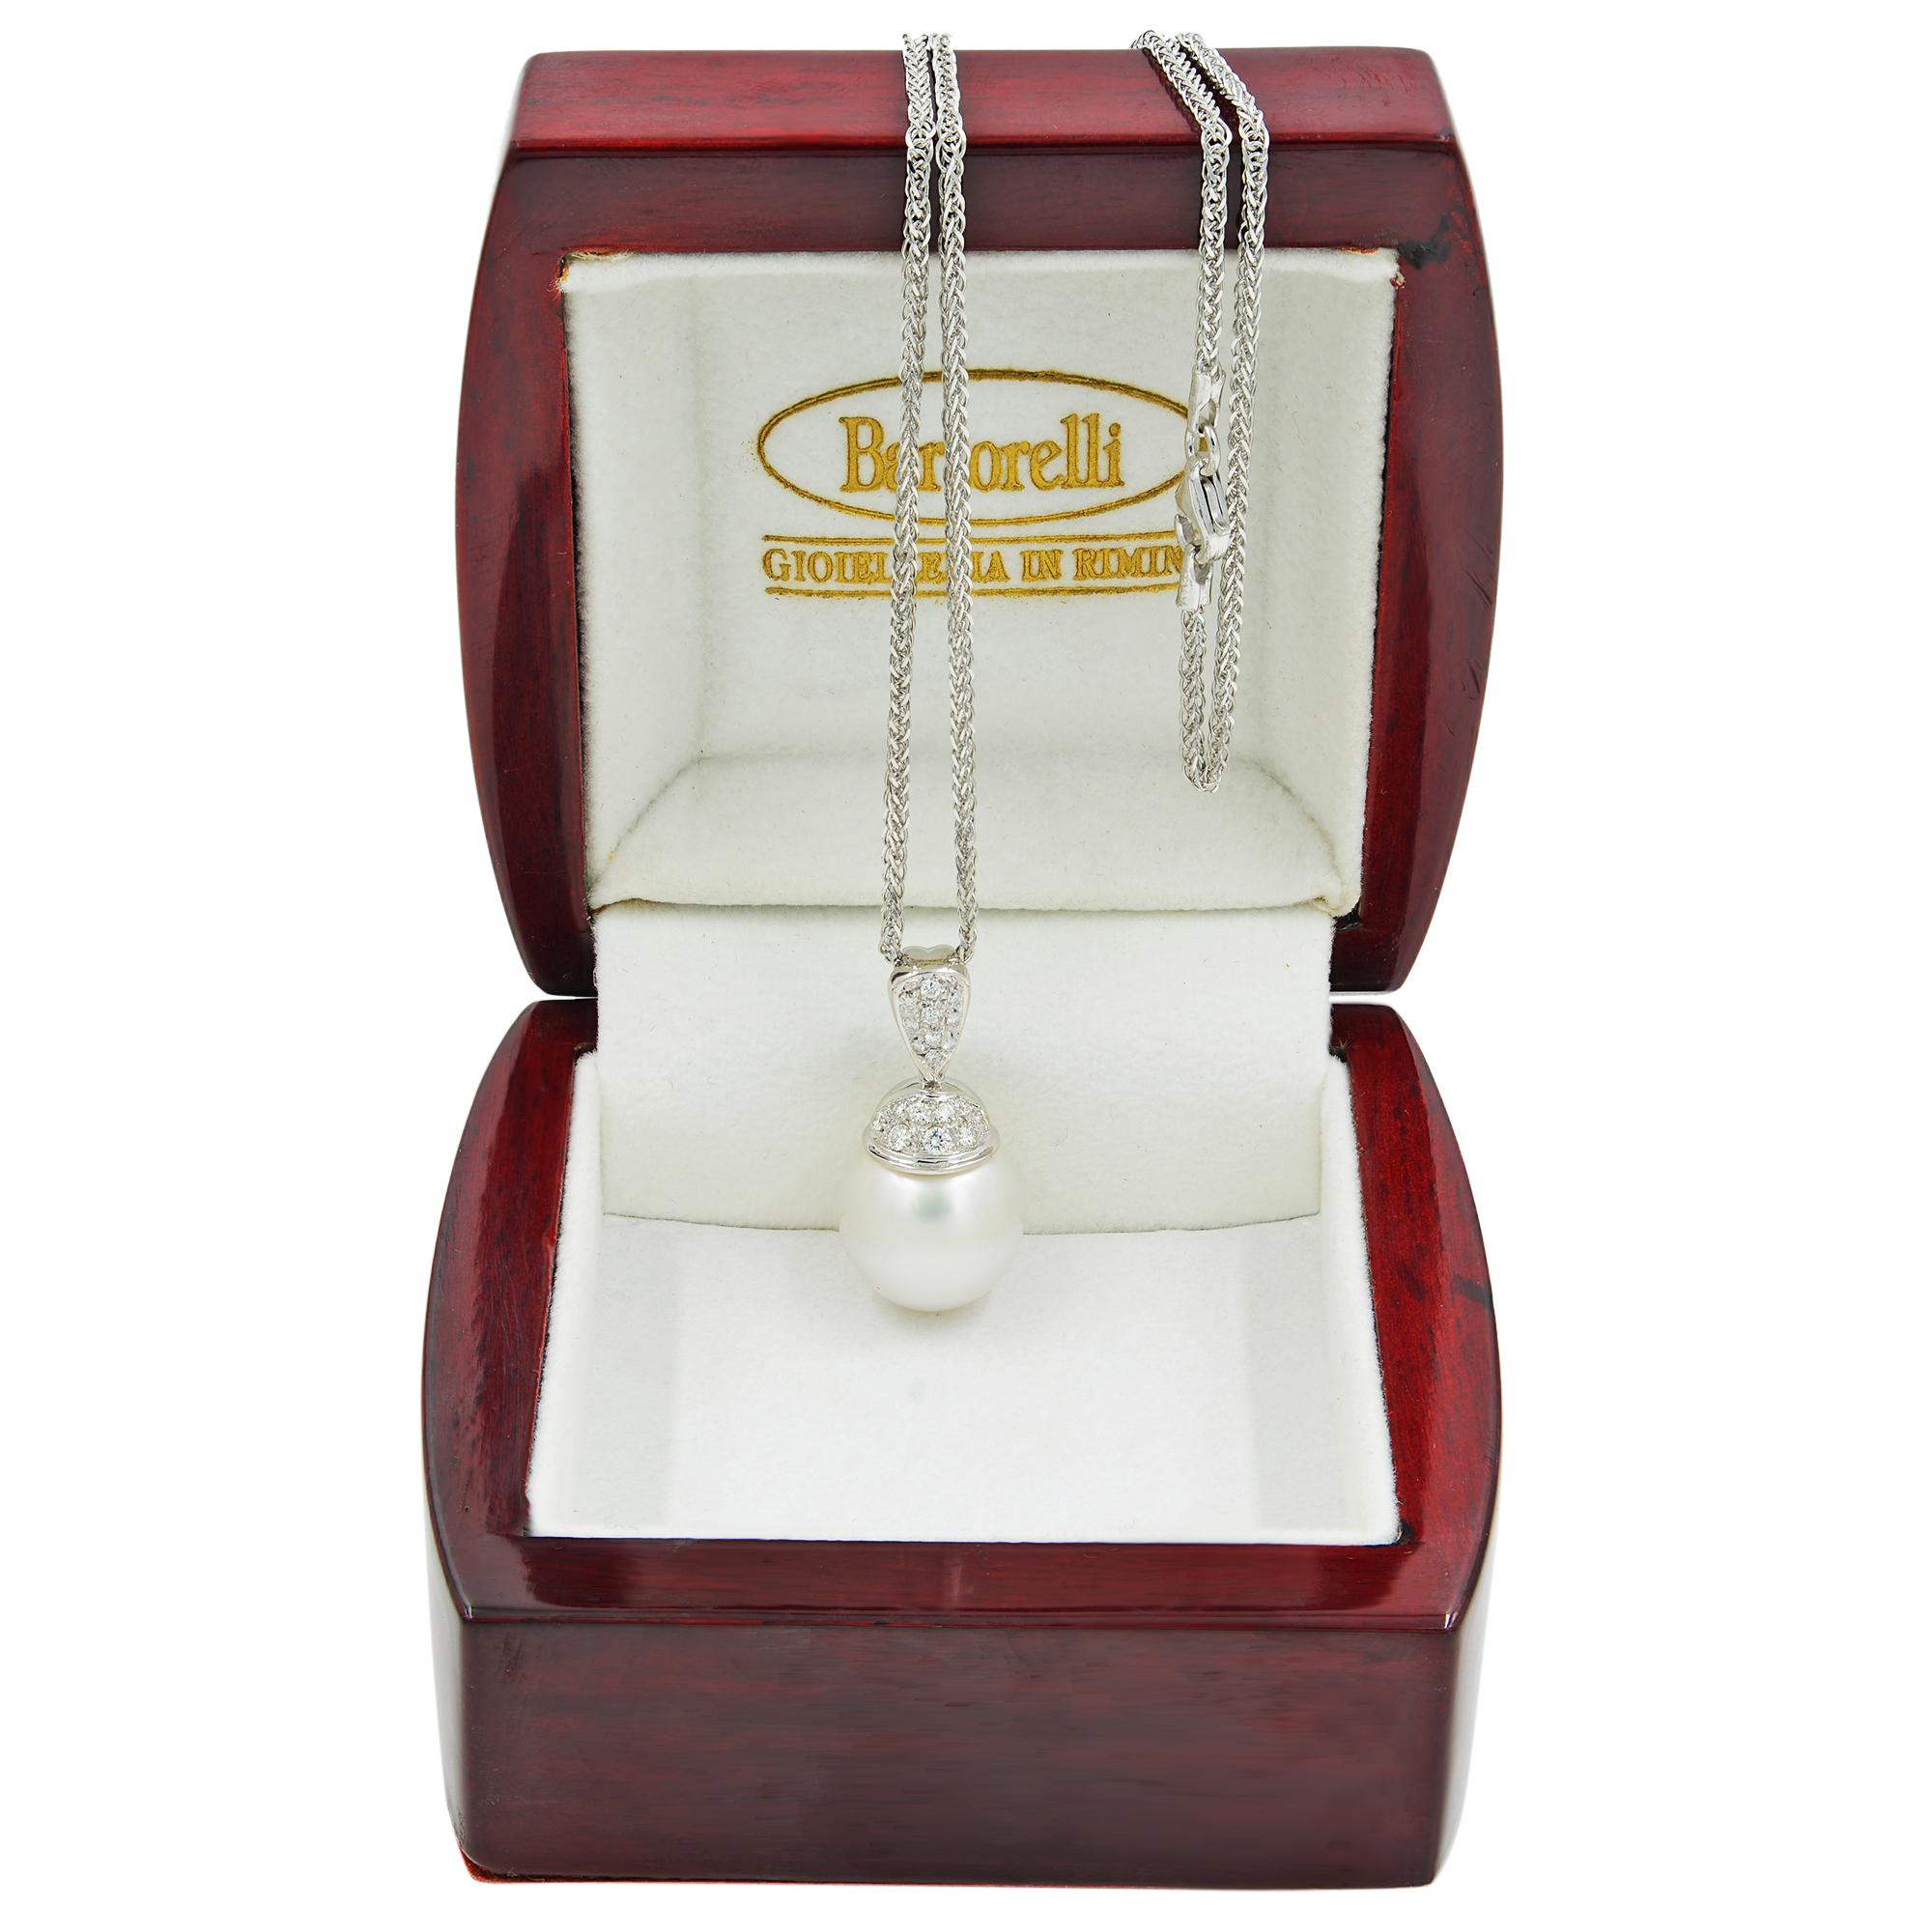 This beautiful pearl and diamond necklace is crafted in 18k white gold and encrusted with white diamonds weighing 0.25ct. Chain length: 16 inches. Pendant length: 16mm. Total weight: 9.8 grams. Hallmarks: 750. This pendant is in excellent condition